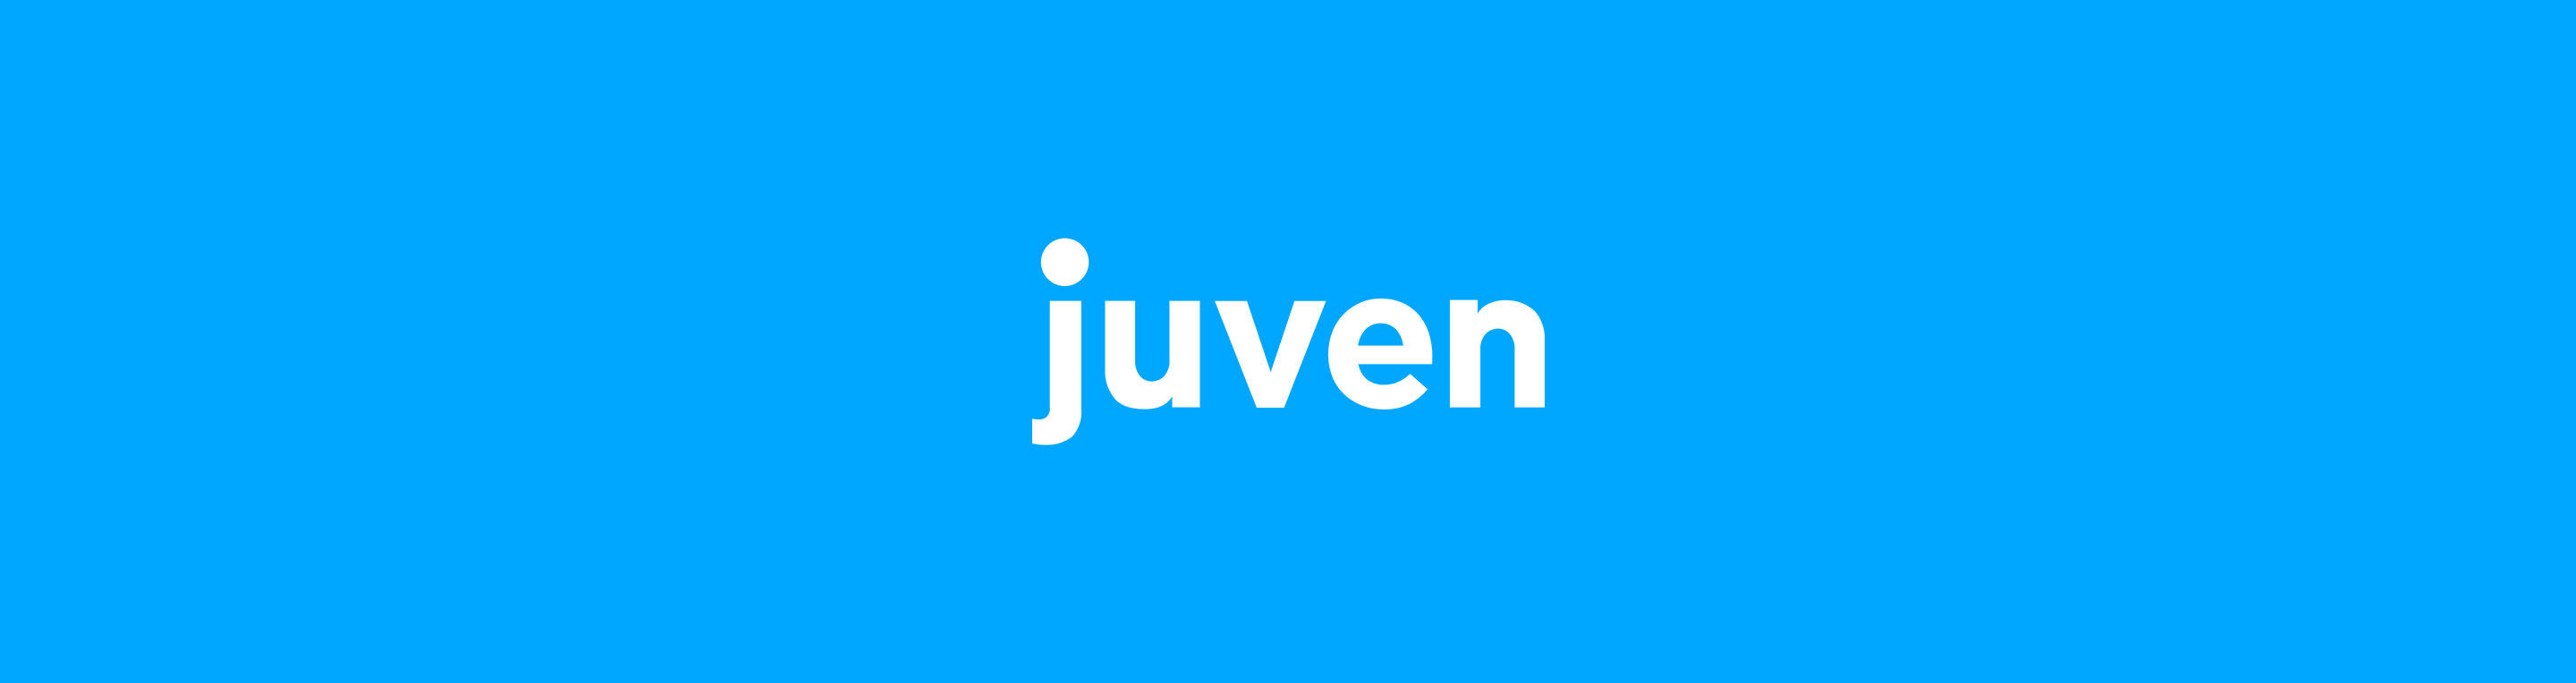 juven-cover